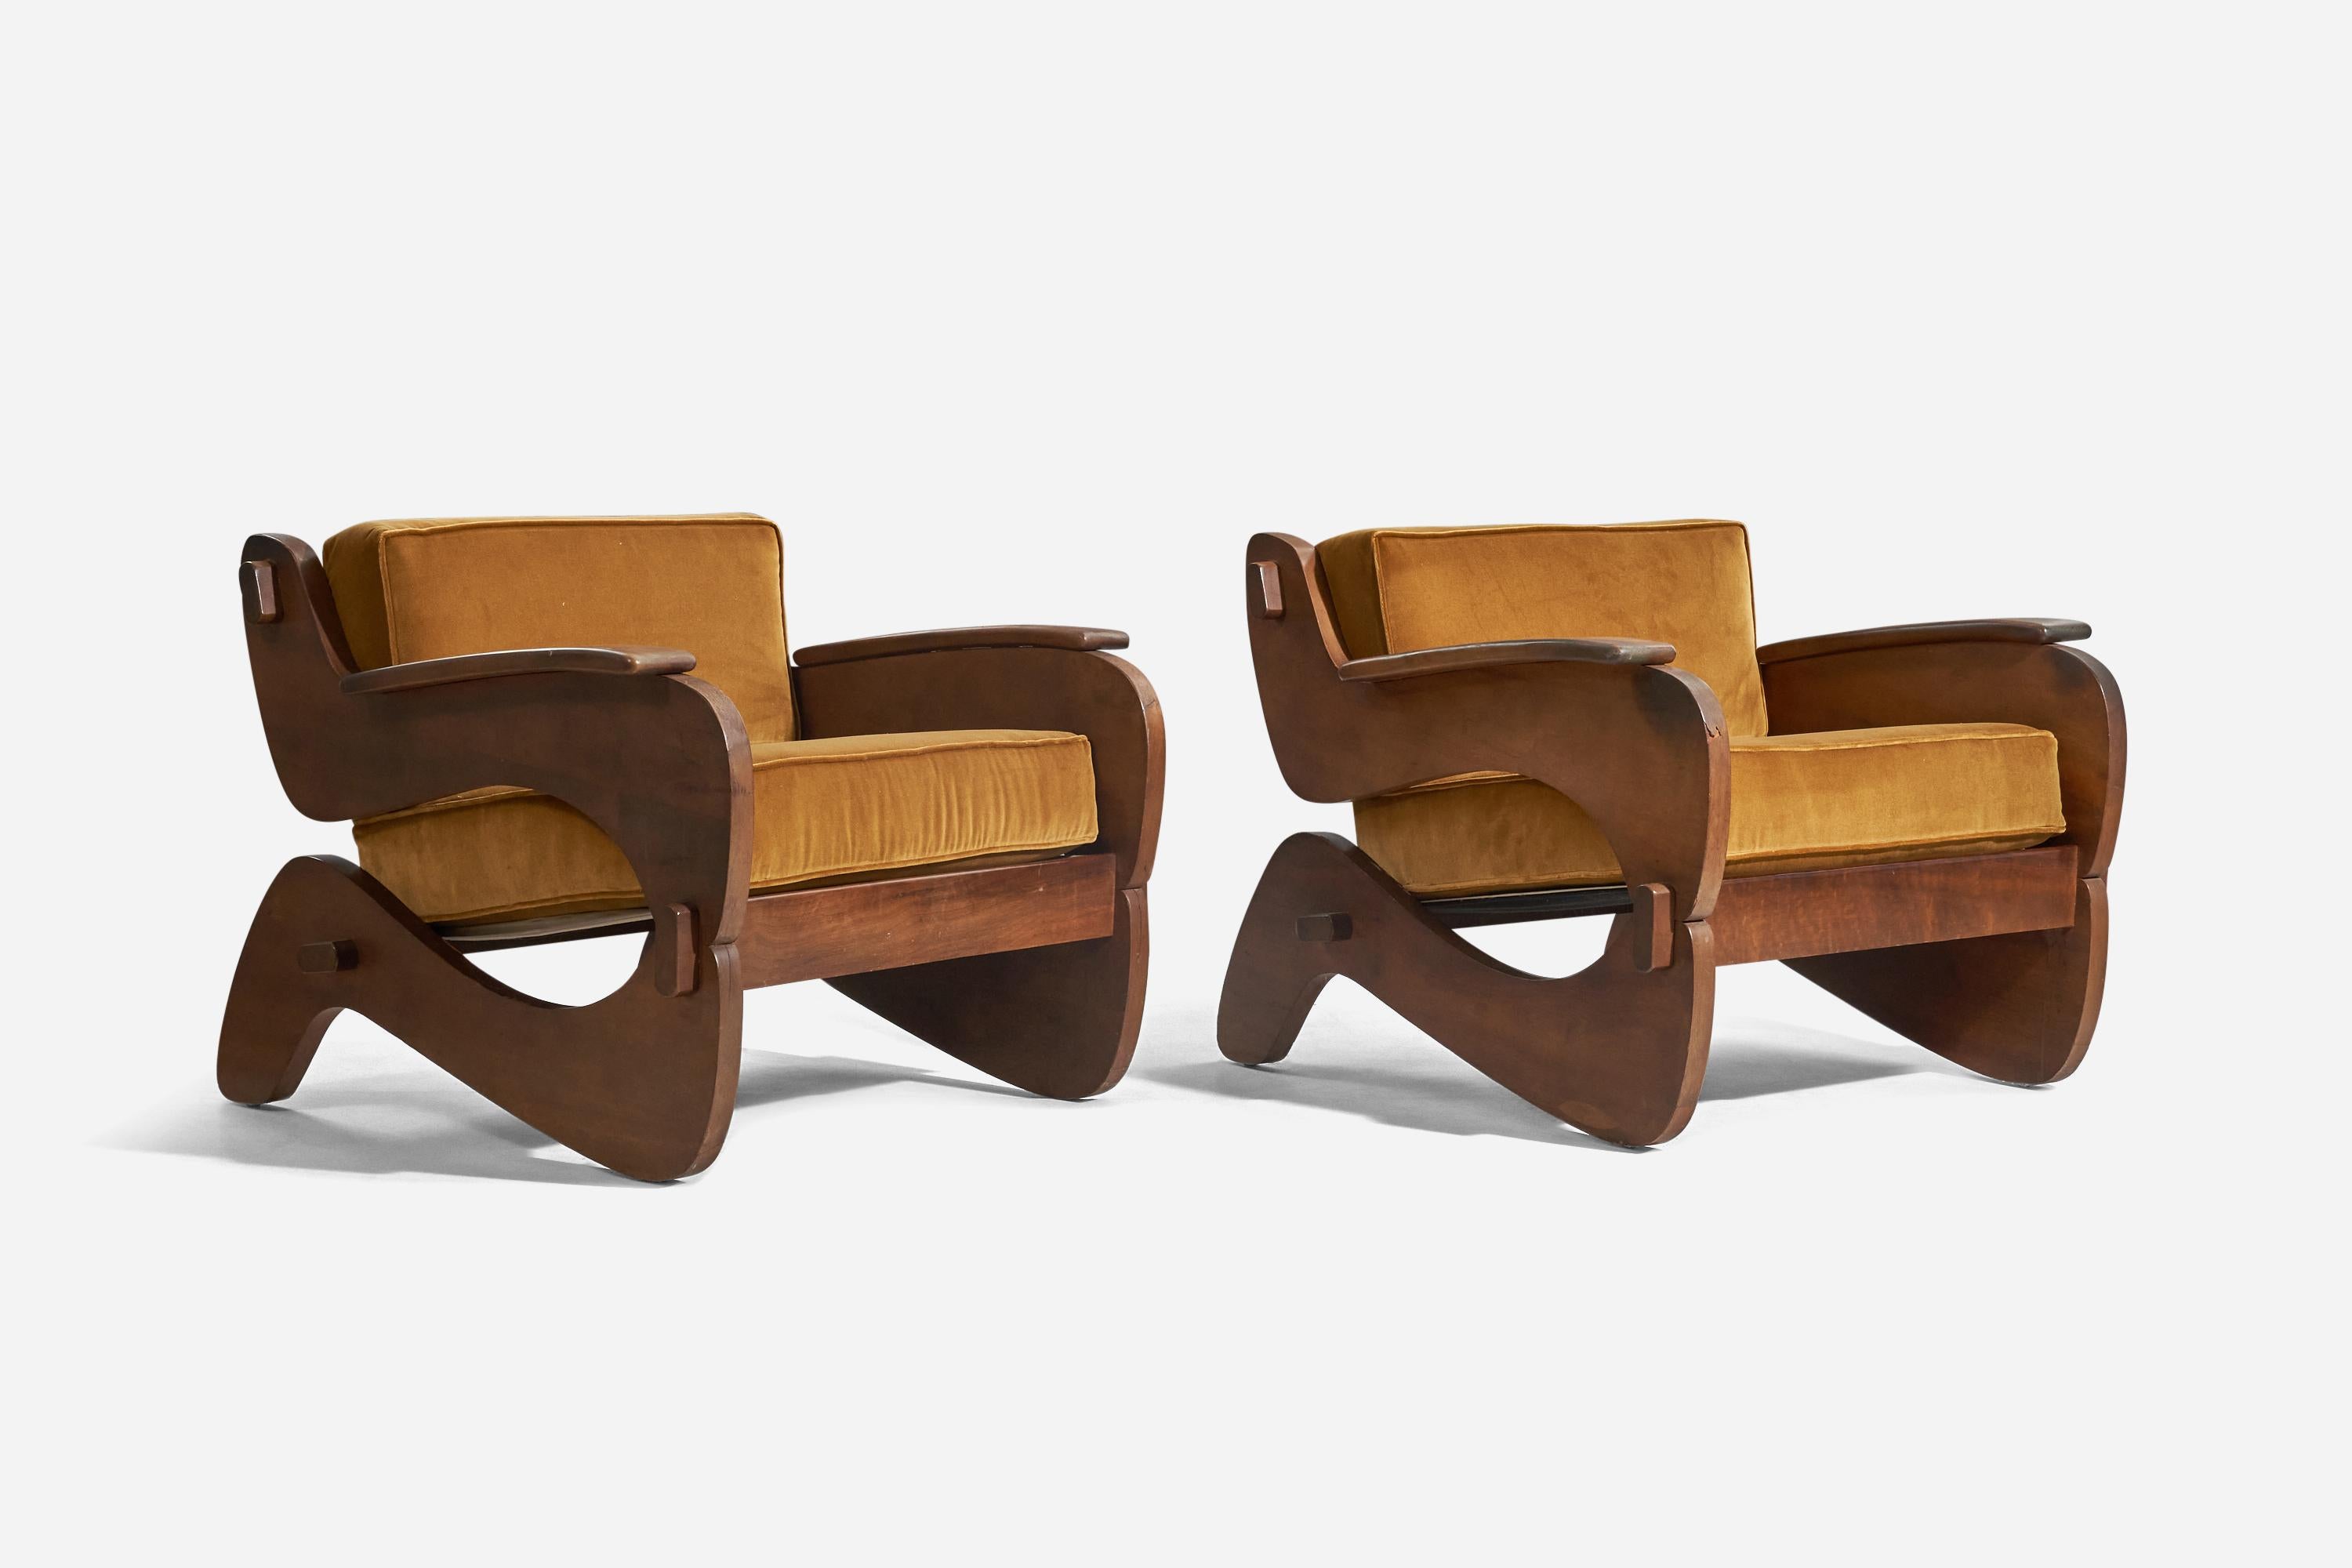 A pair of wood and velvet lounge chairs designed and produced by Grafton Everest, South Africa, c. 1970s.